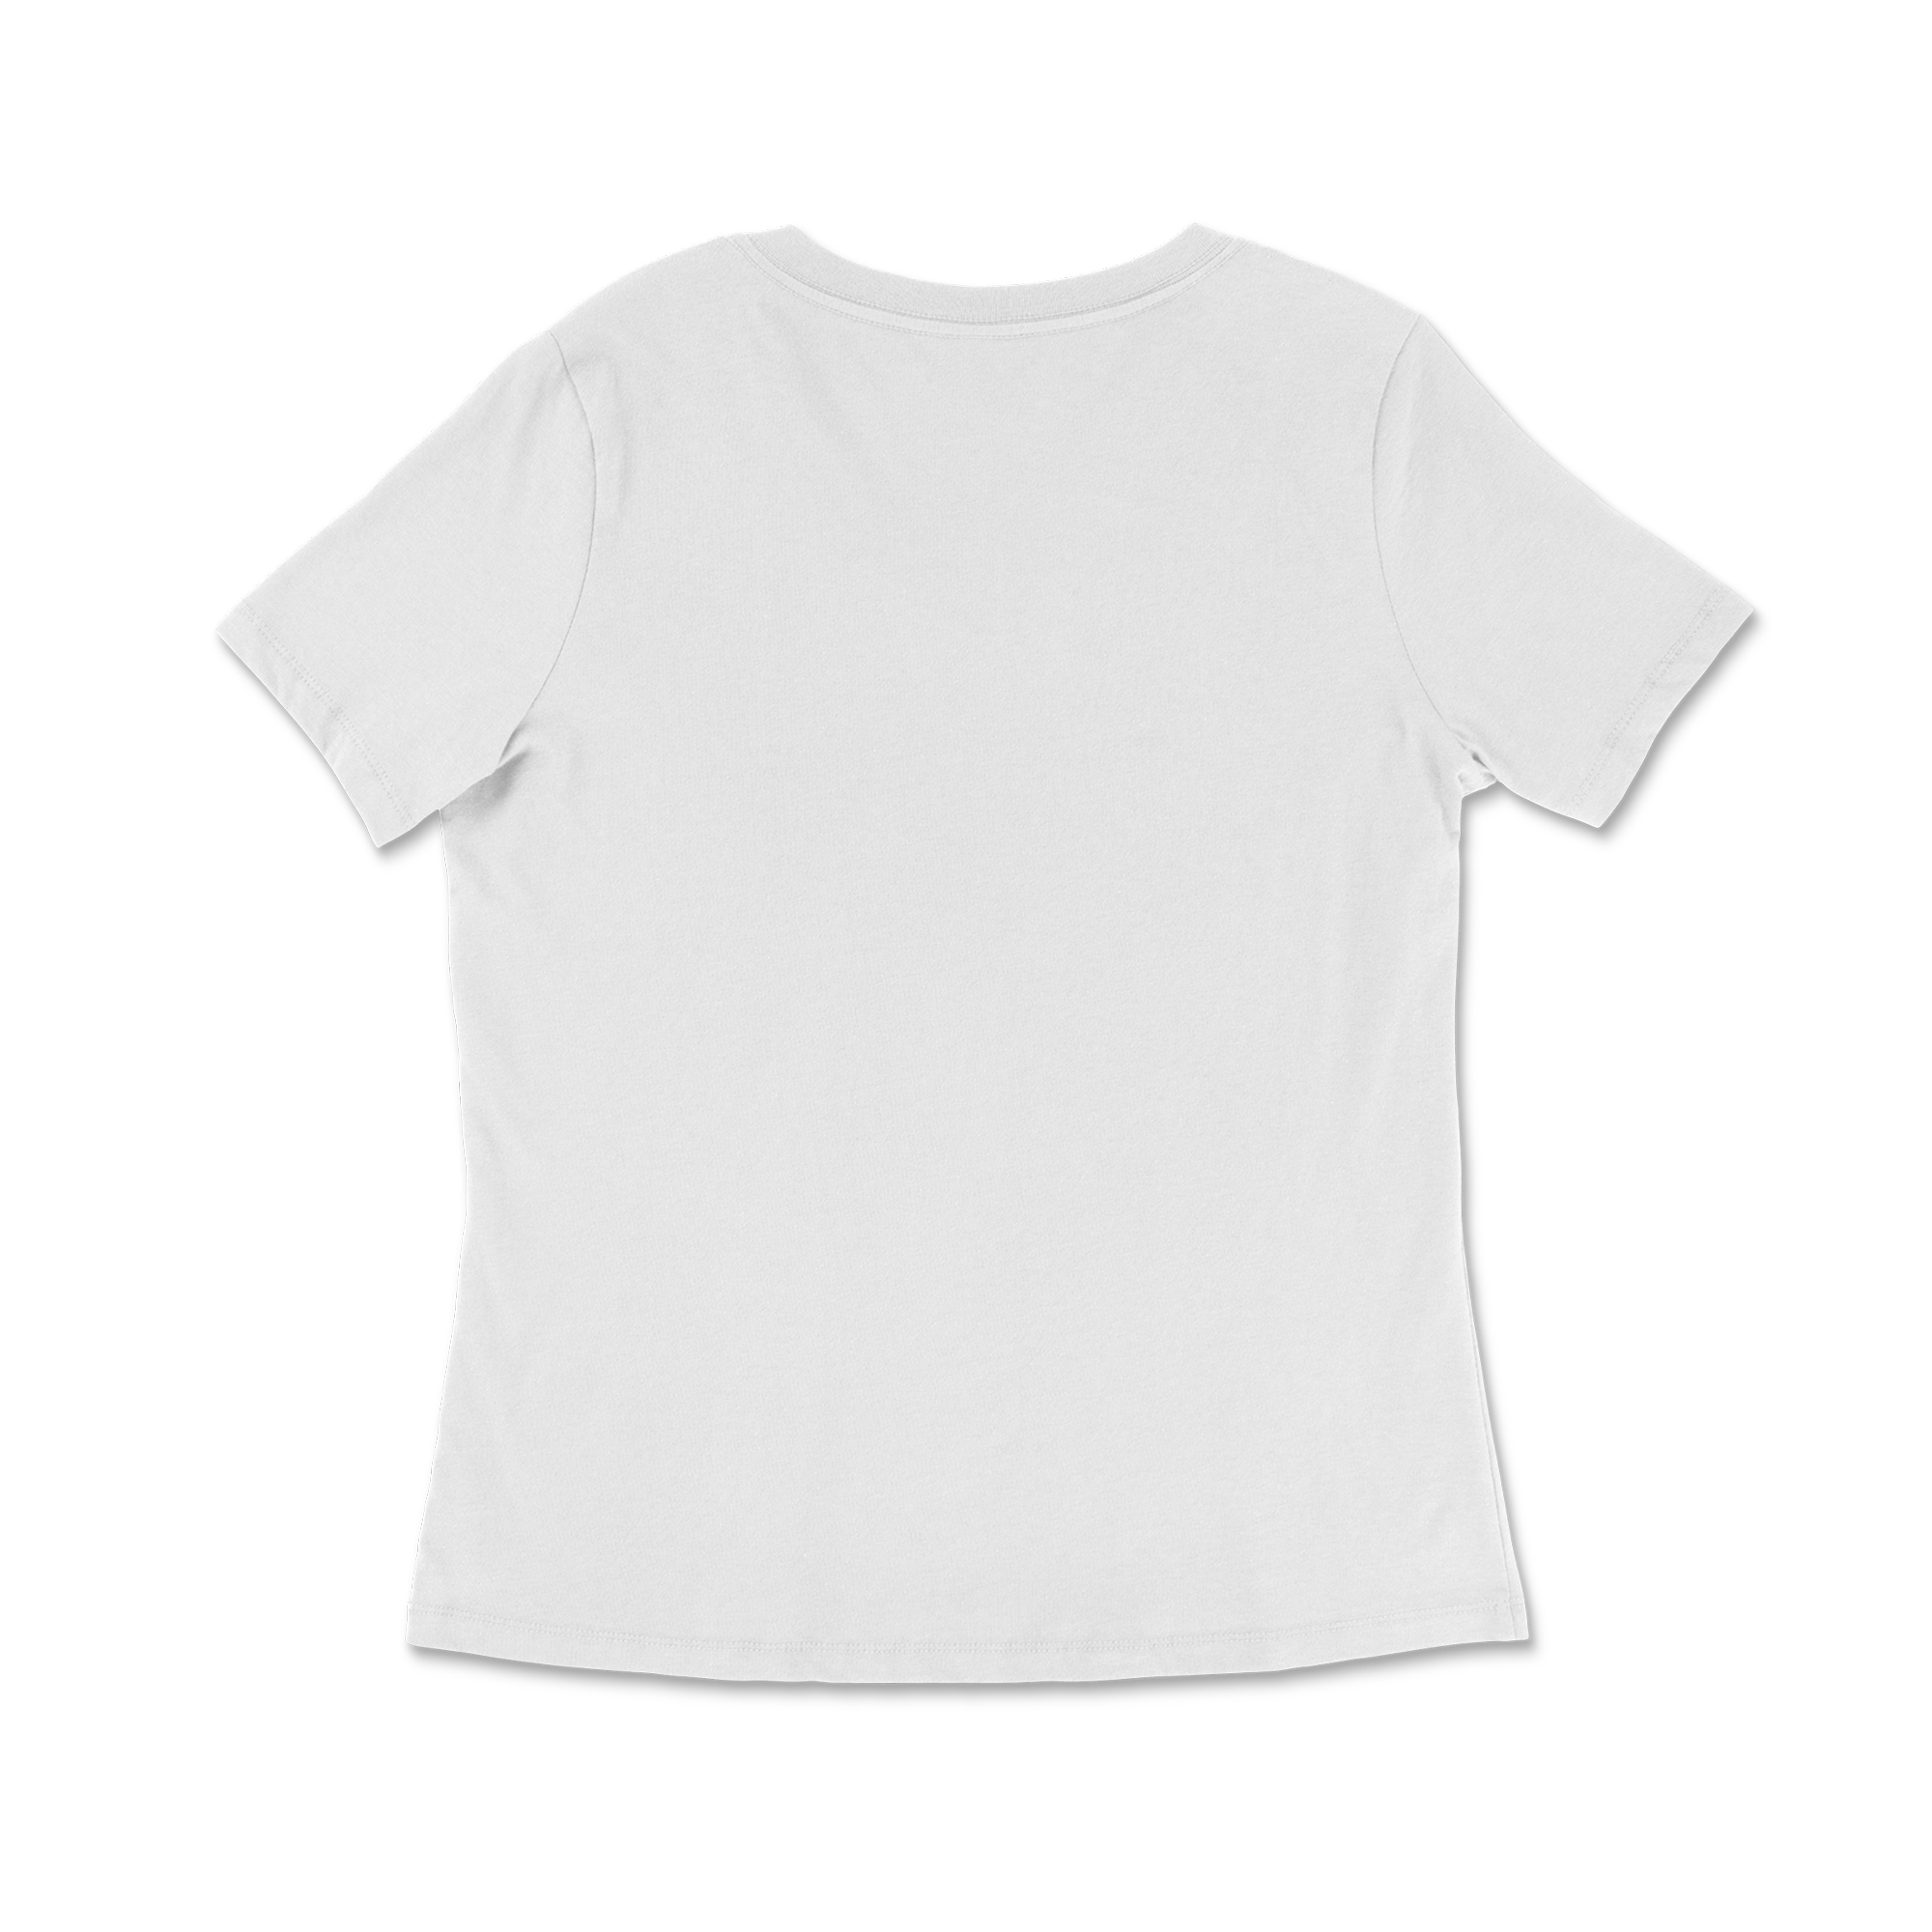 100% Cotton Relaxed Fit V-Neck